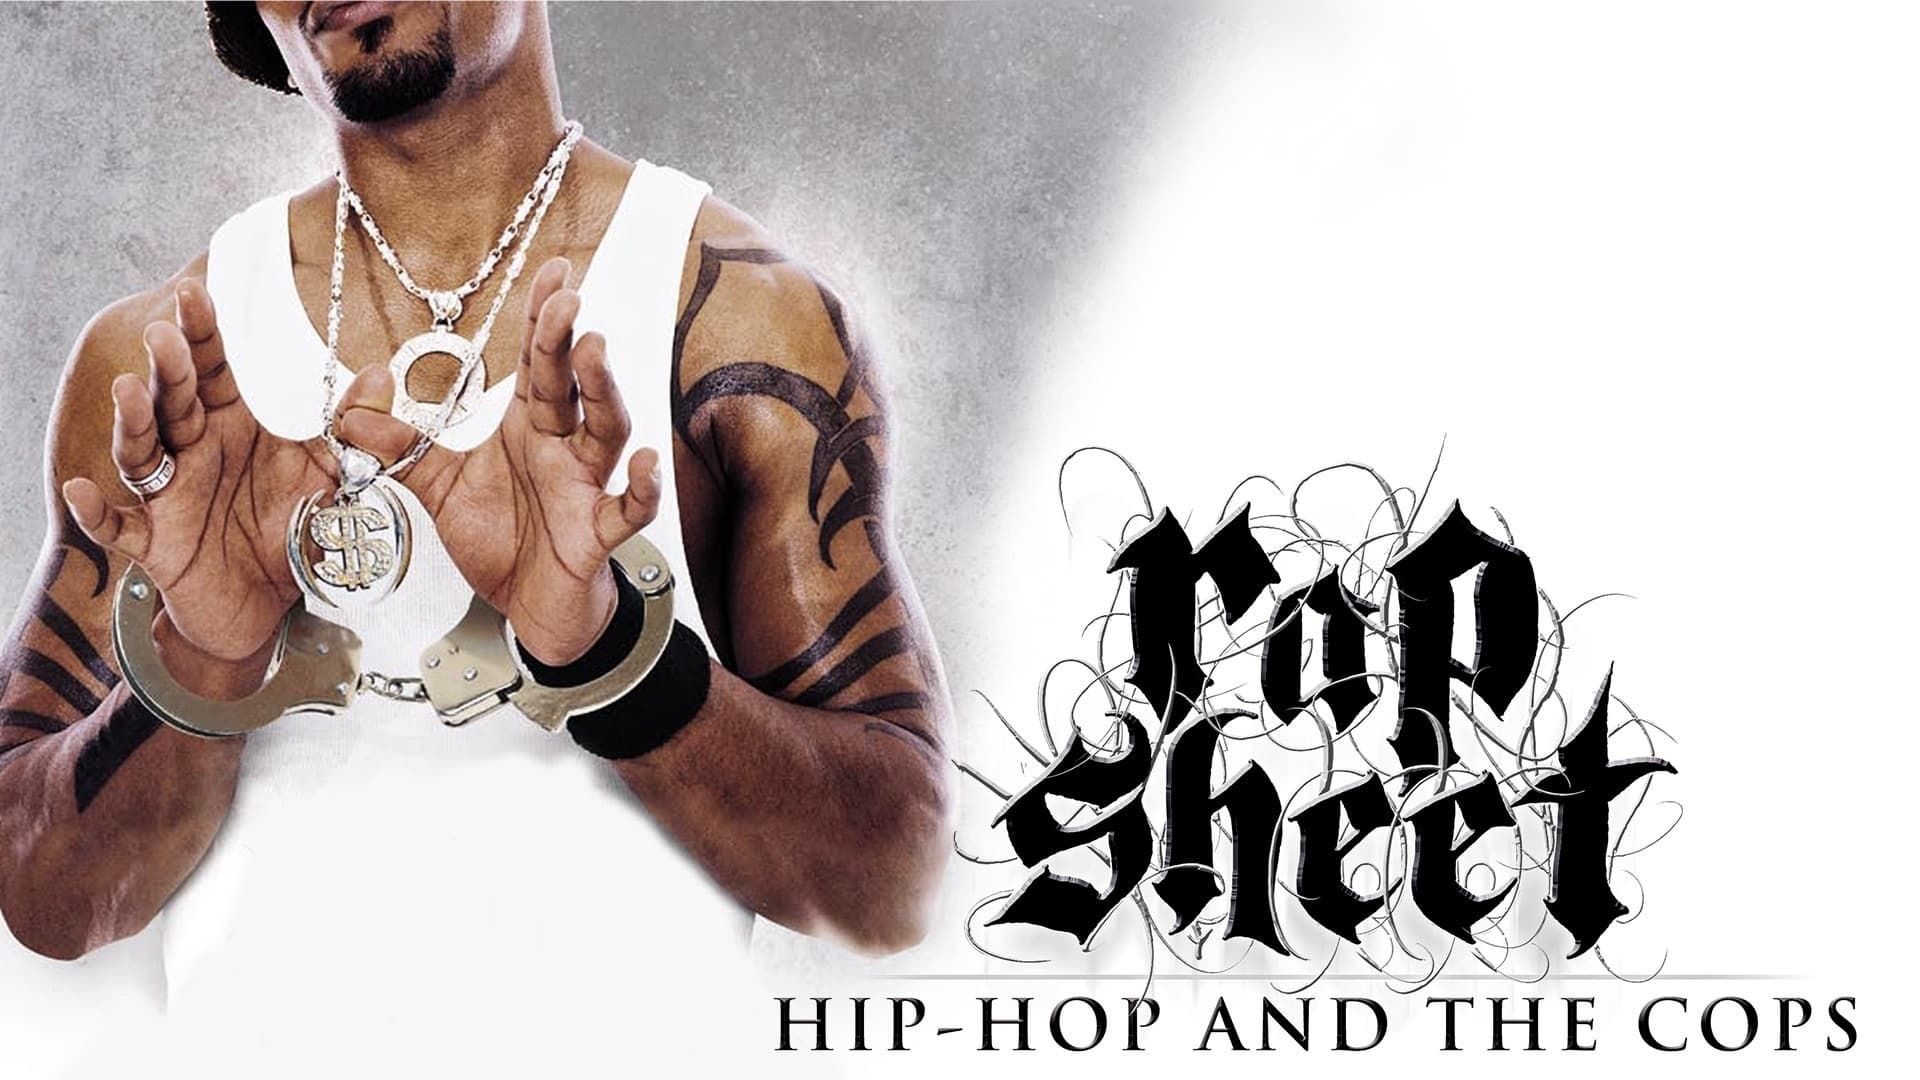 Rap Sheet: Hip-Hop and the Cops background